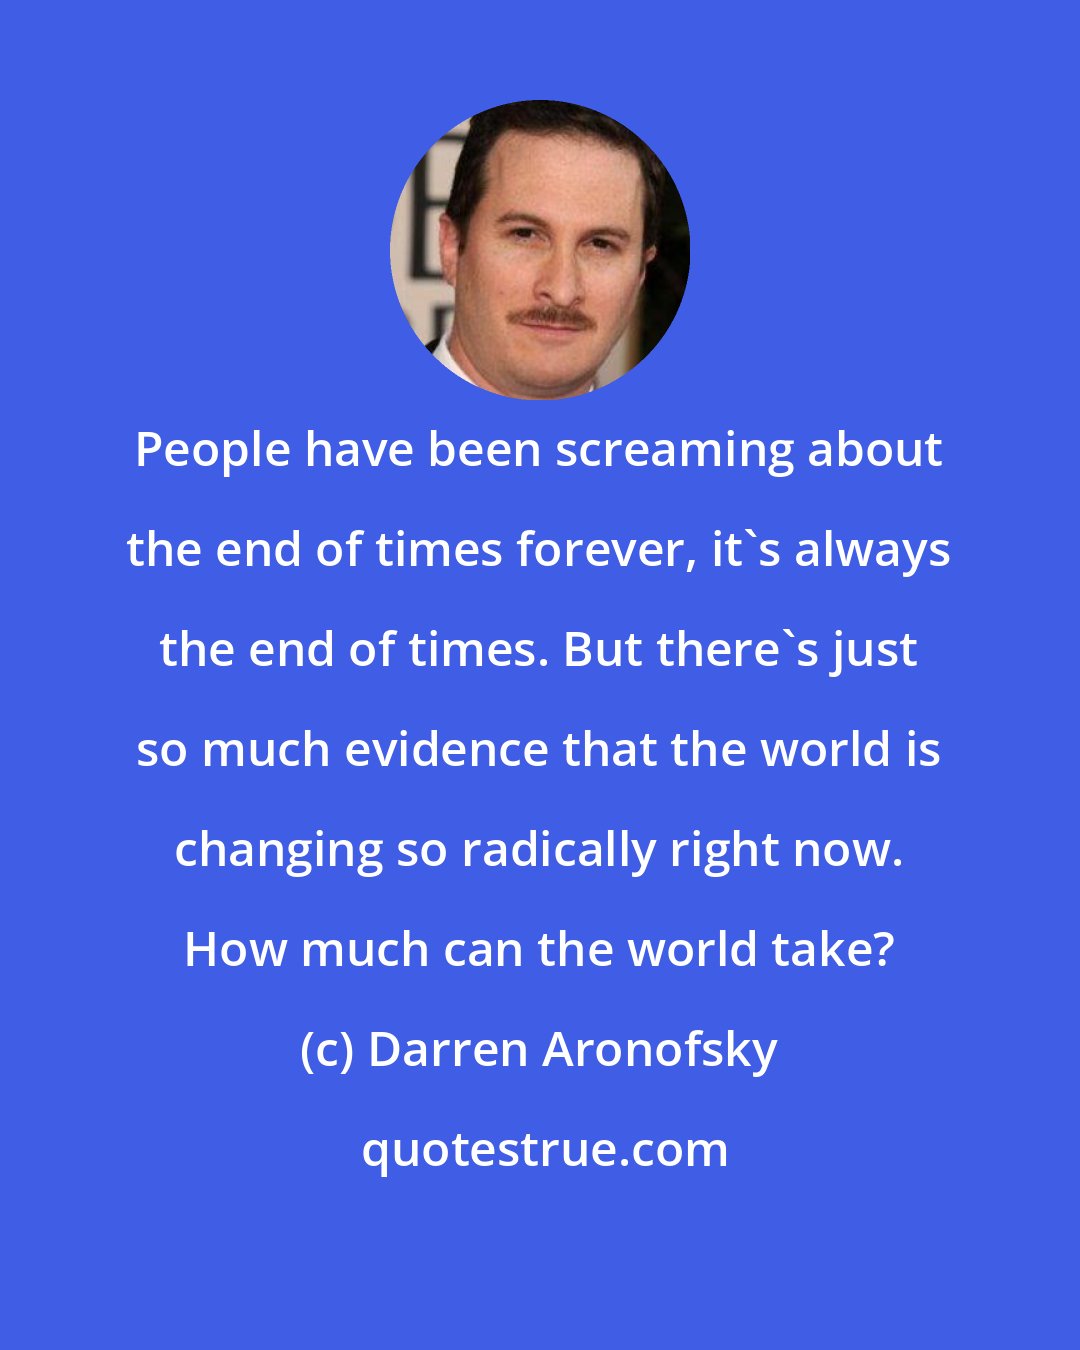 Darren Aronofsky: People have been screaming about the end of times forever, it's always the end of times. But there's just so much evidence that the world is changing so radically right now. How much can the world take?